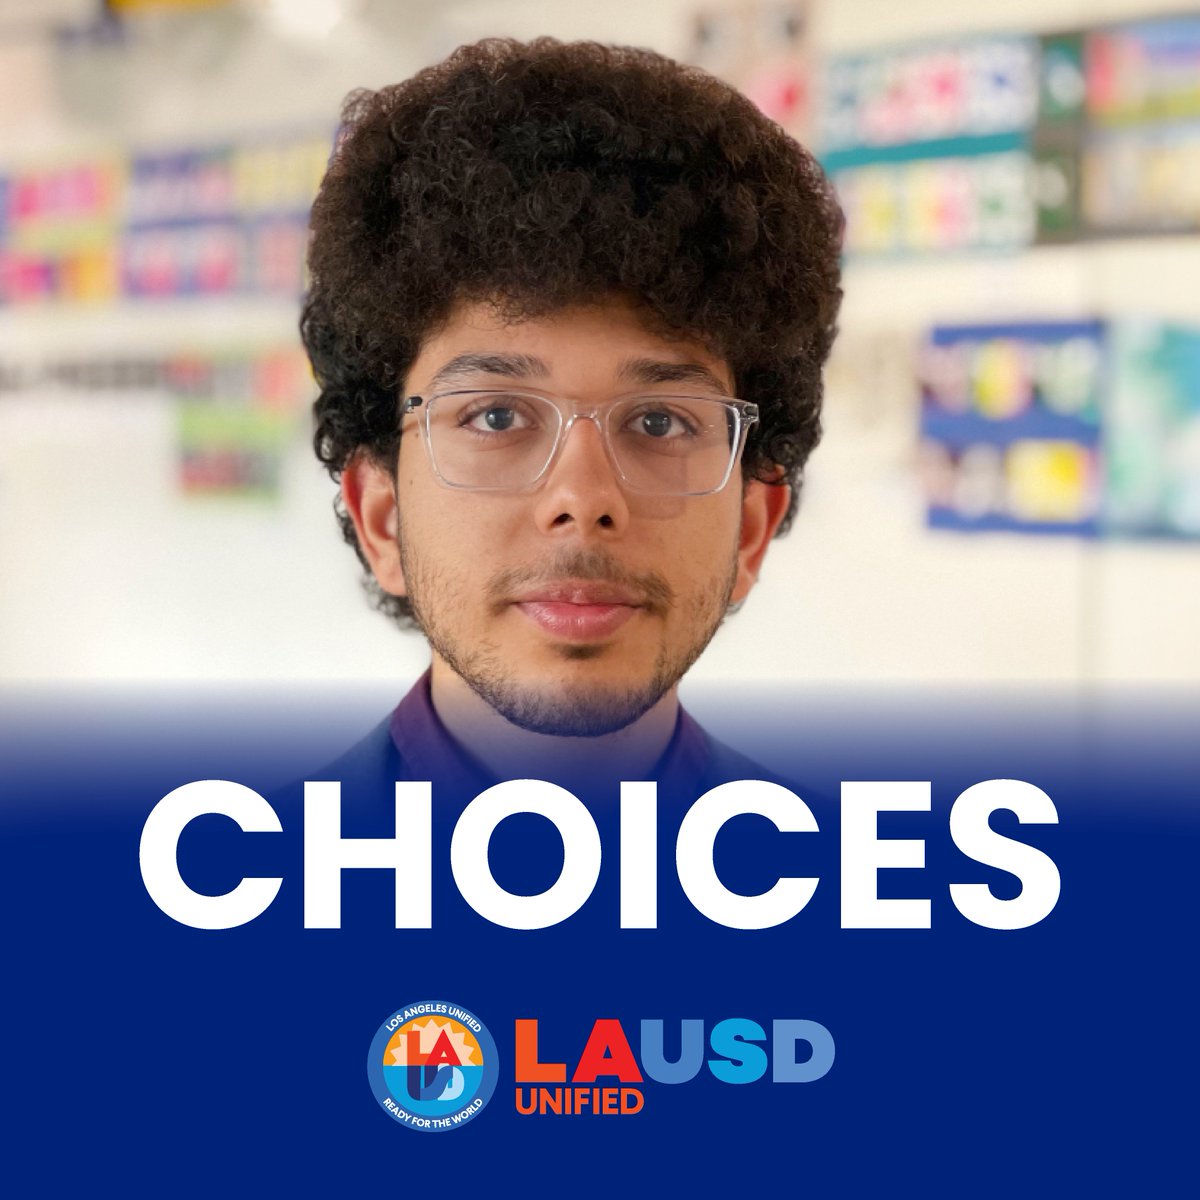 Click here to explore your child's educational future with Magnet Programs, Multilingual Multicultural Programs, Schools for Advanced Studies and more! Now Accepting Applications For 2024-25. ✏️ Visit goto.lausd.net